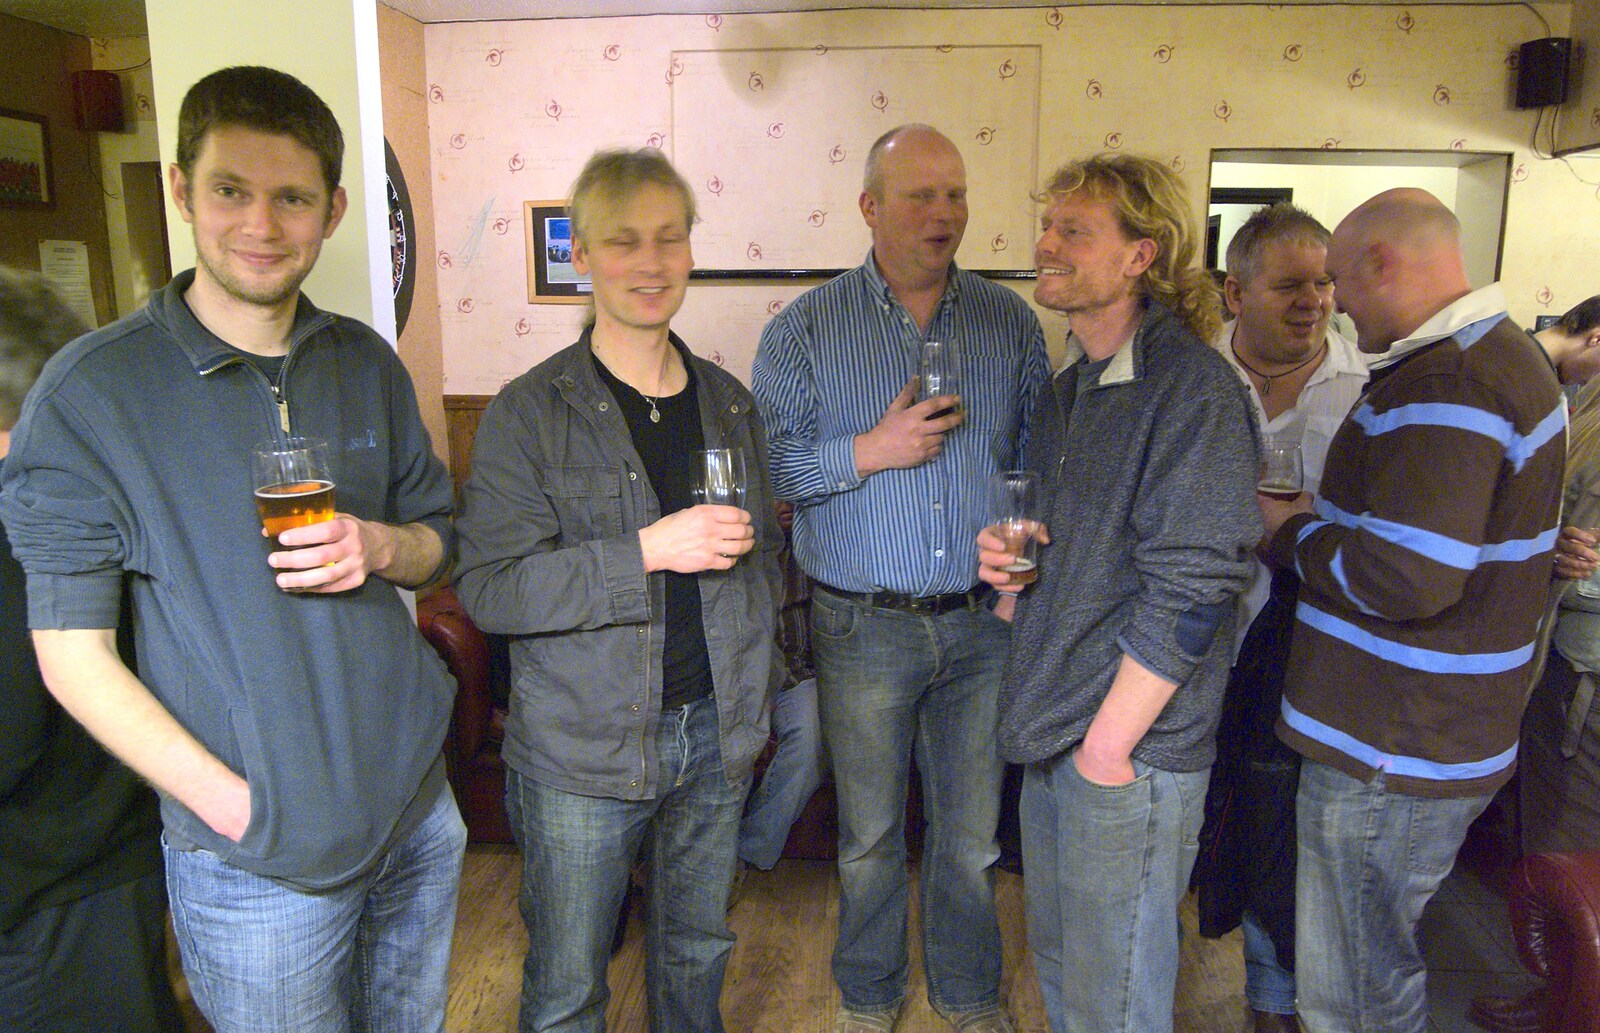 The Boy Phil and the gang in The Tree from The Cherry Tree Beer Festival, Yaxley, Suffolk - 4th February 2011